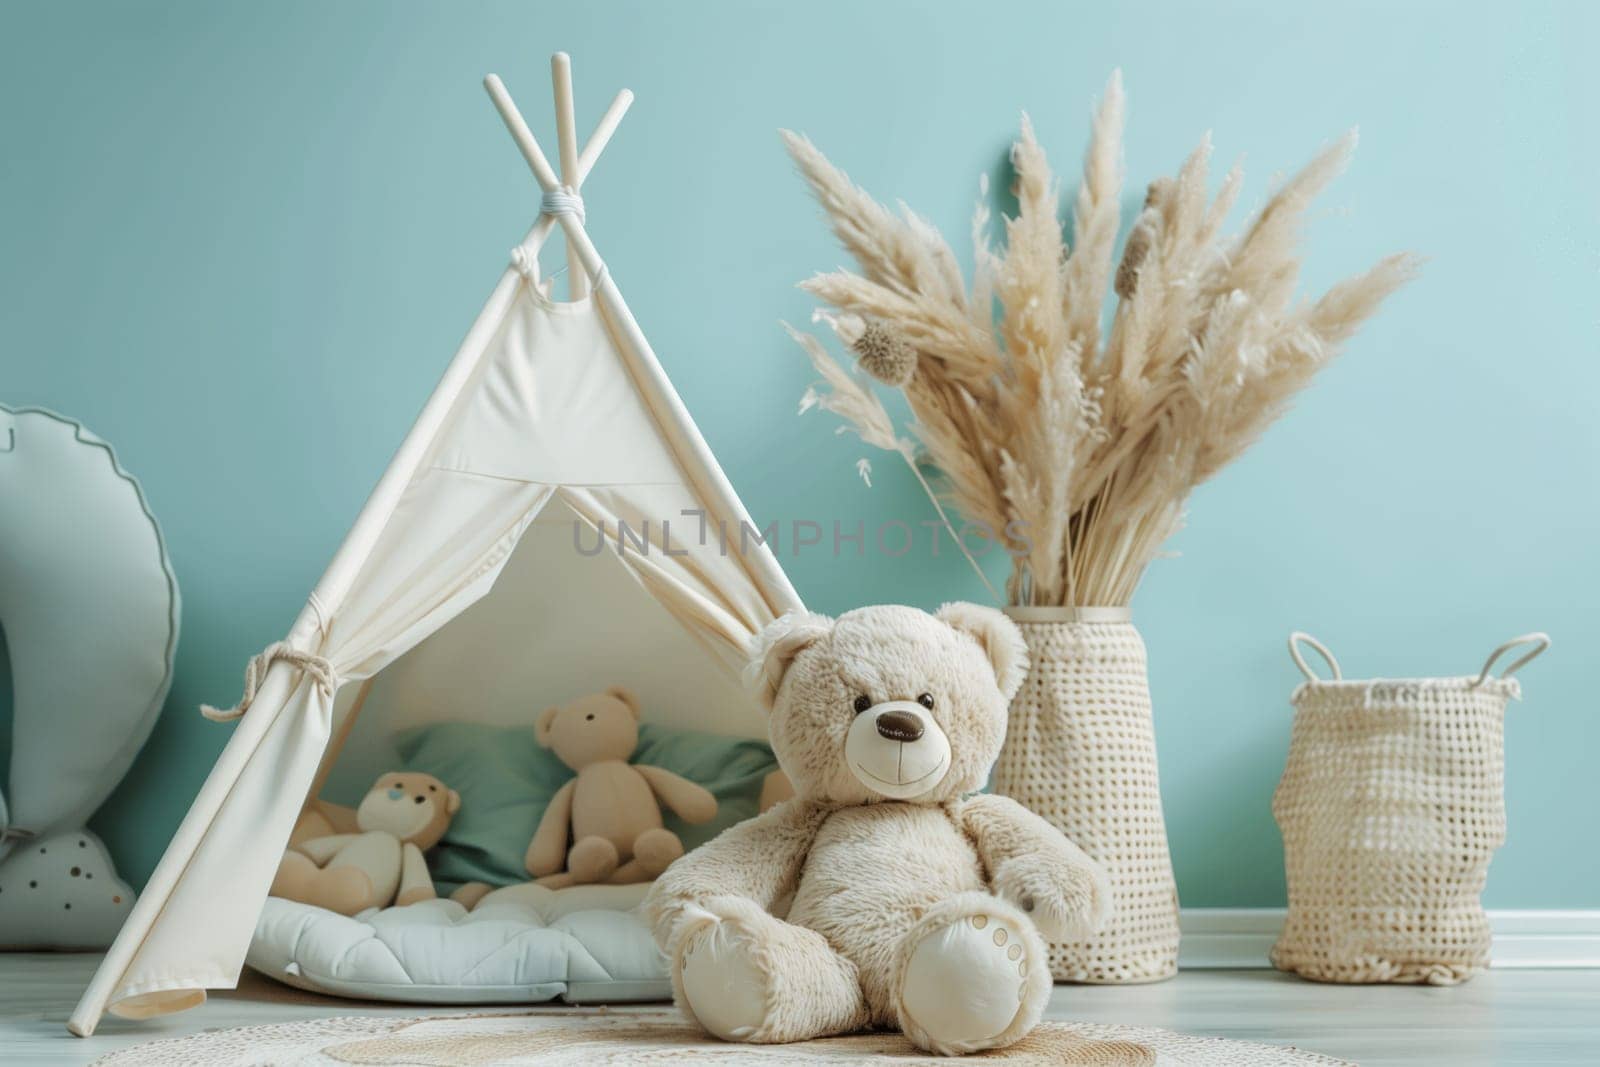 A teddy bear sits in front of a teepee in an artistic room setting by richwolf